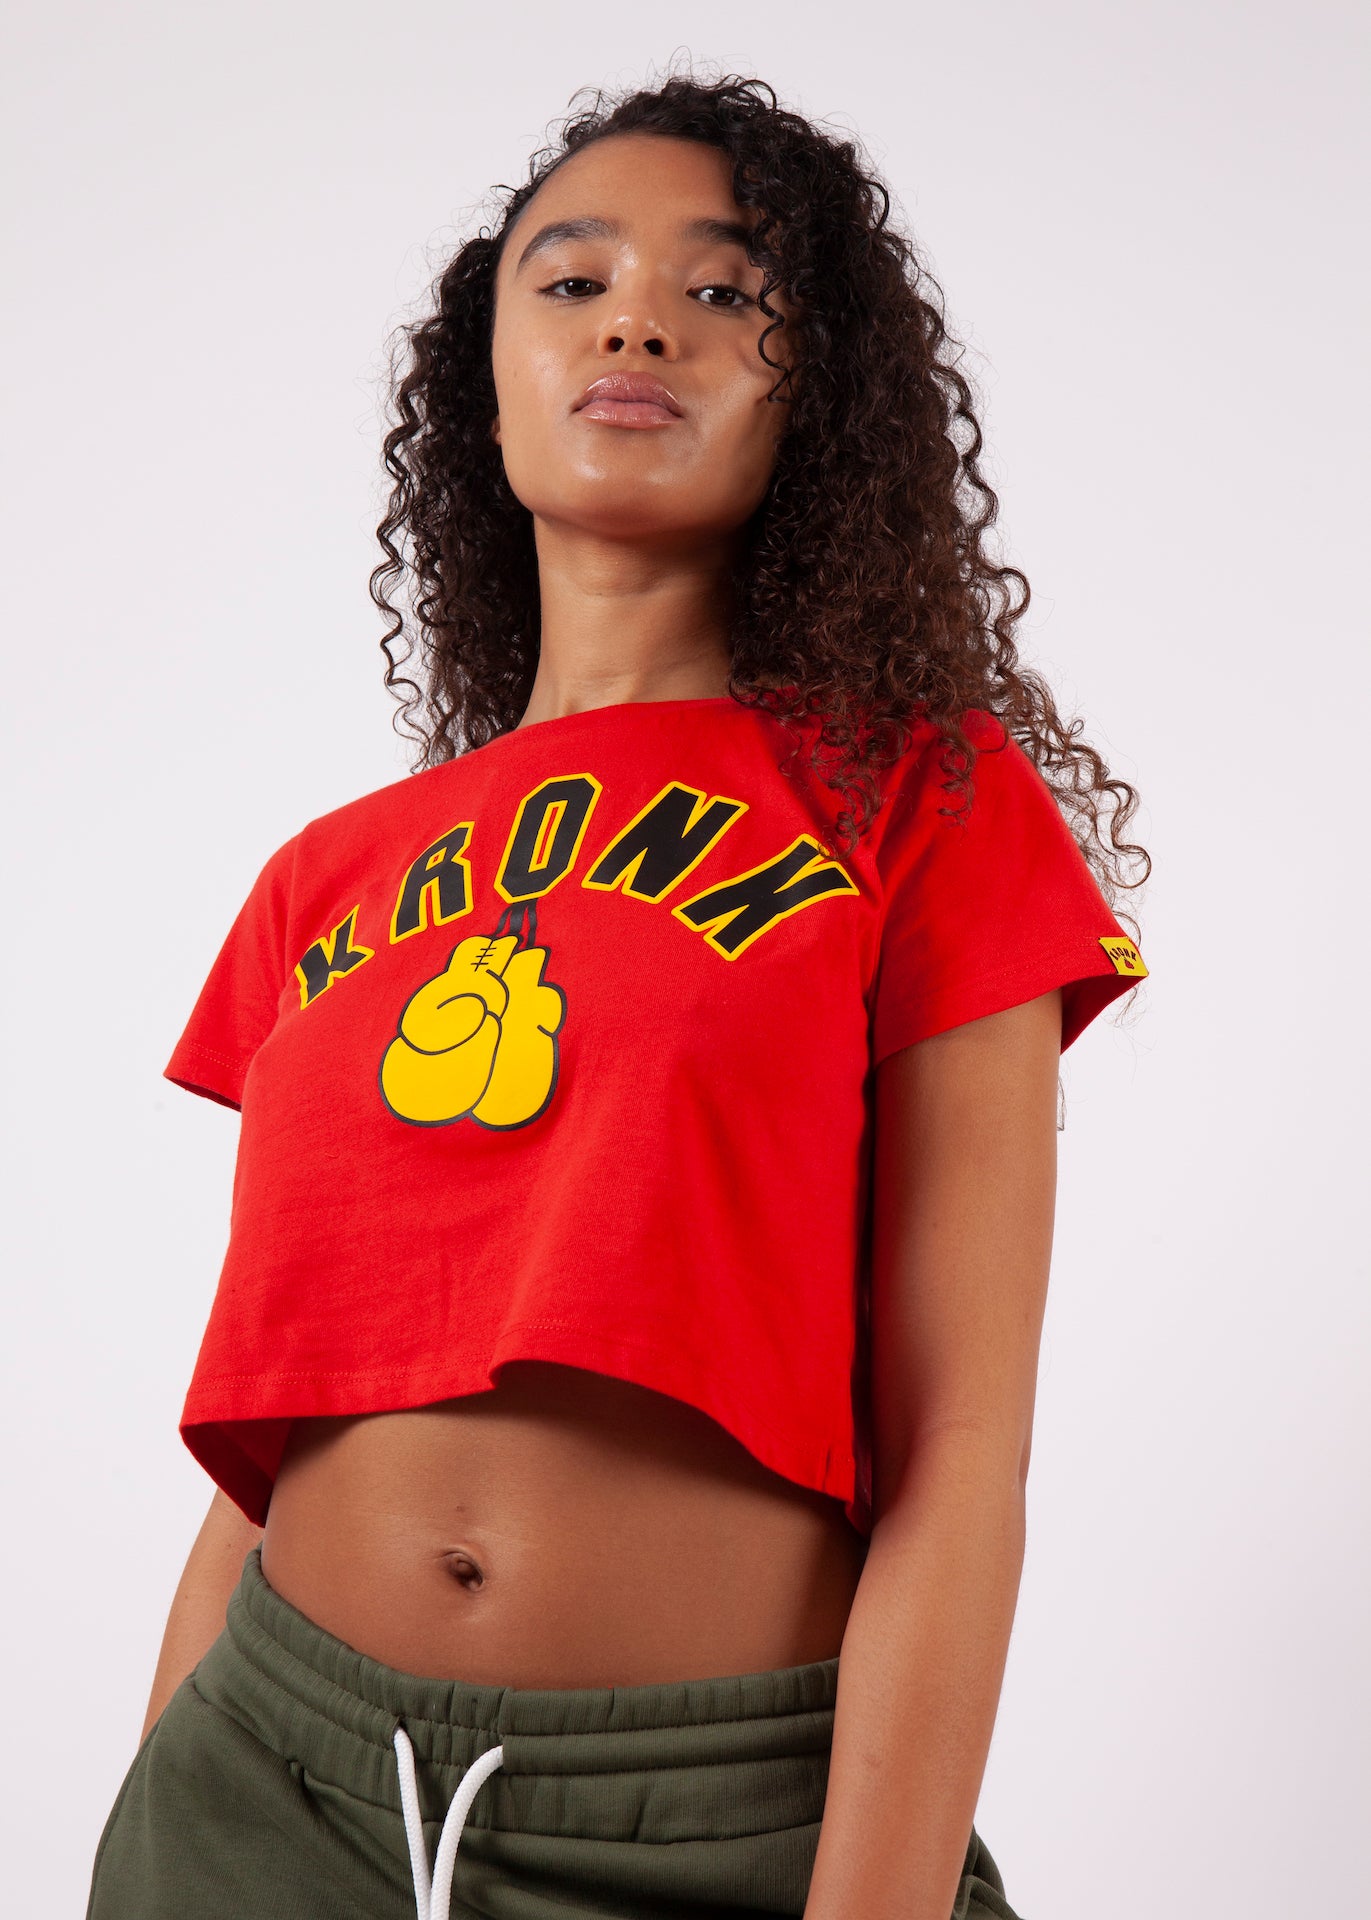 KRONK Gloves Cropped T Shirt Red